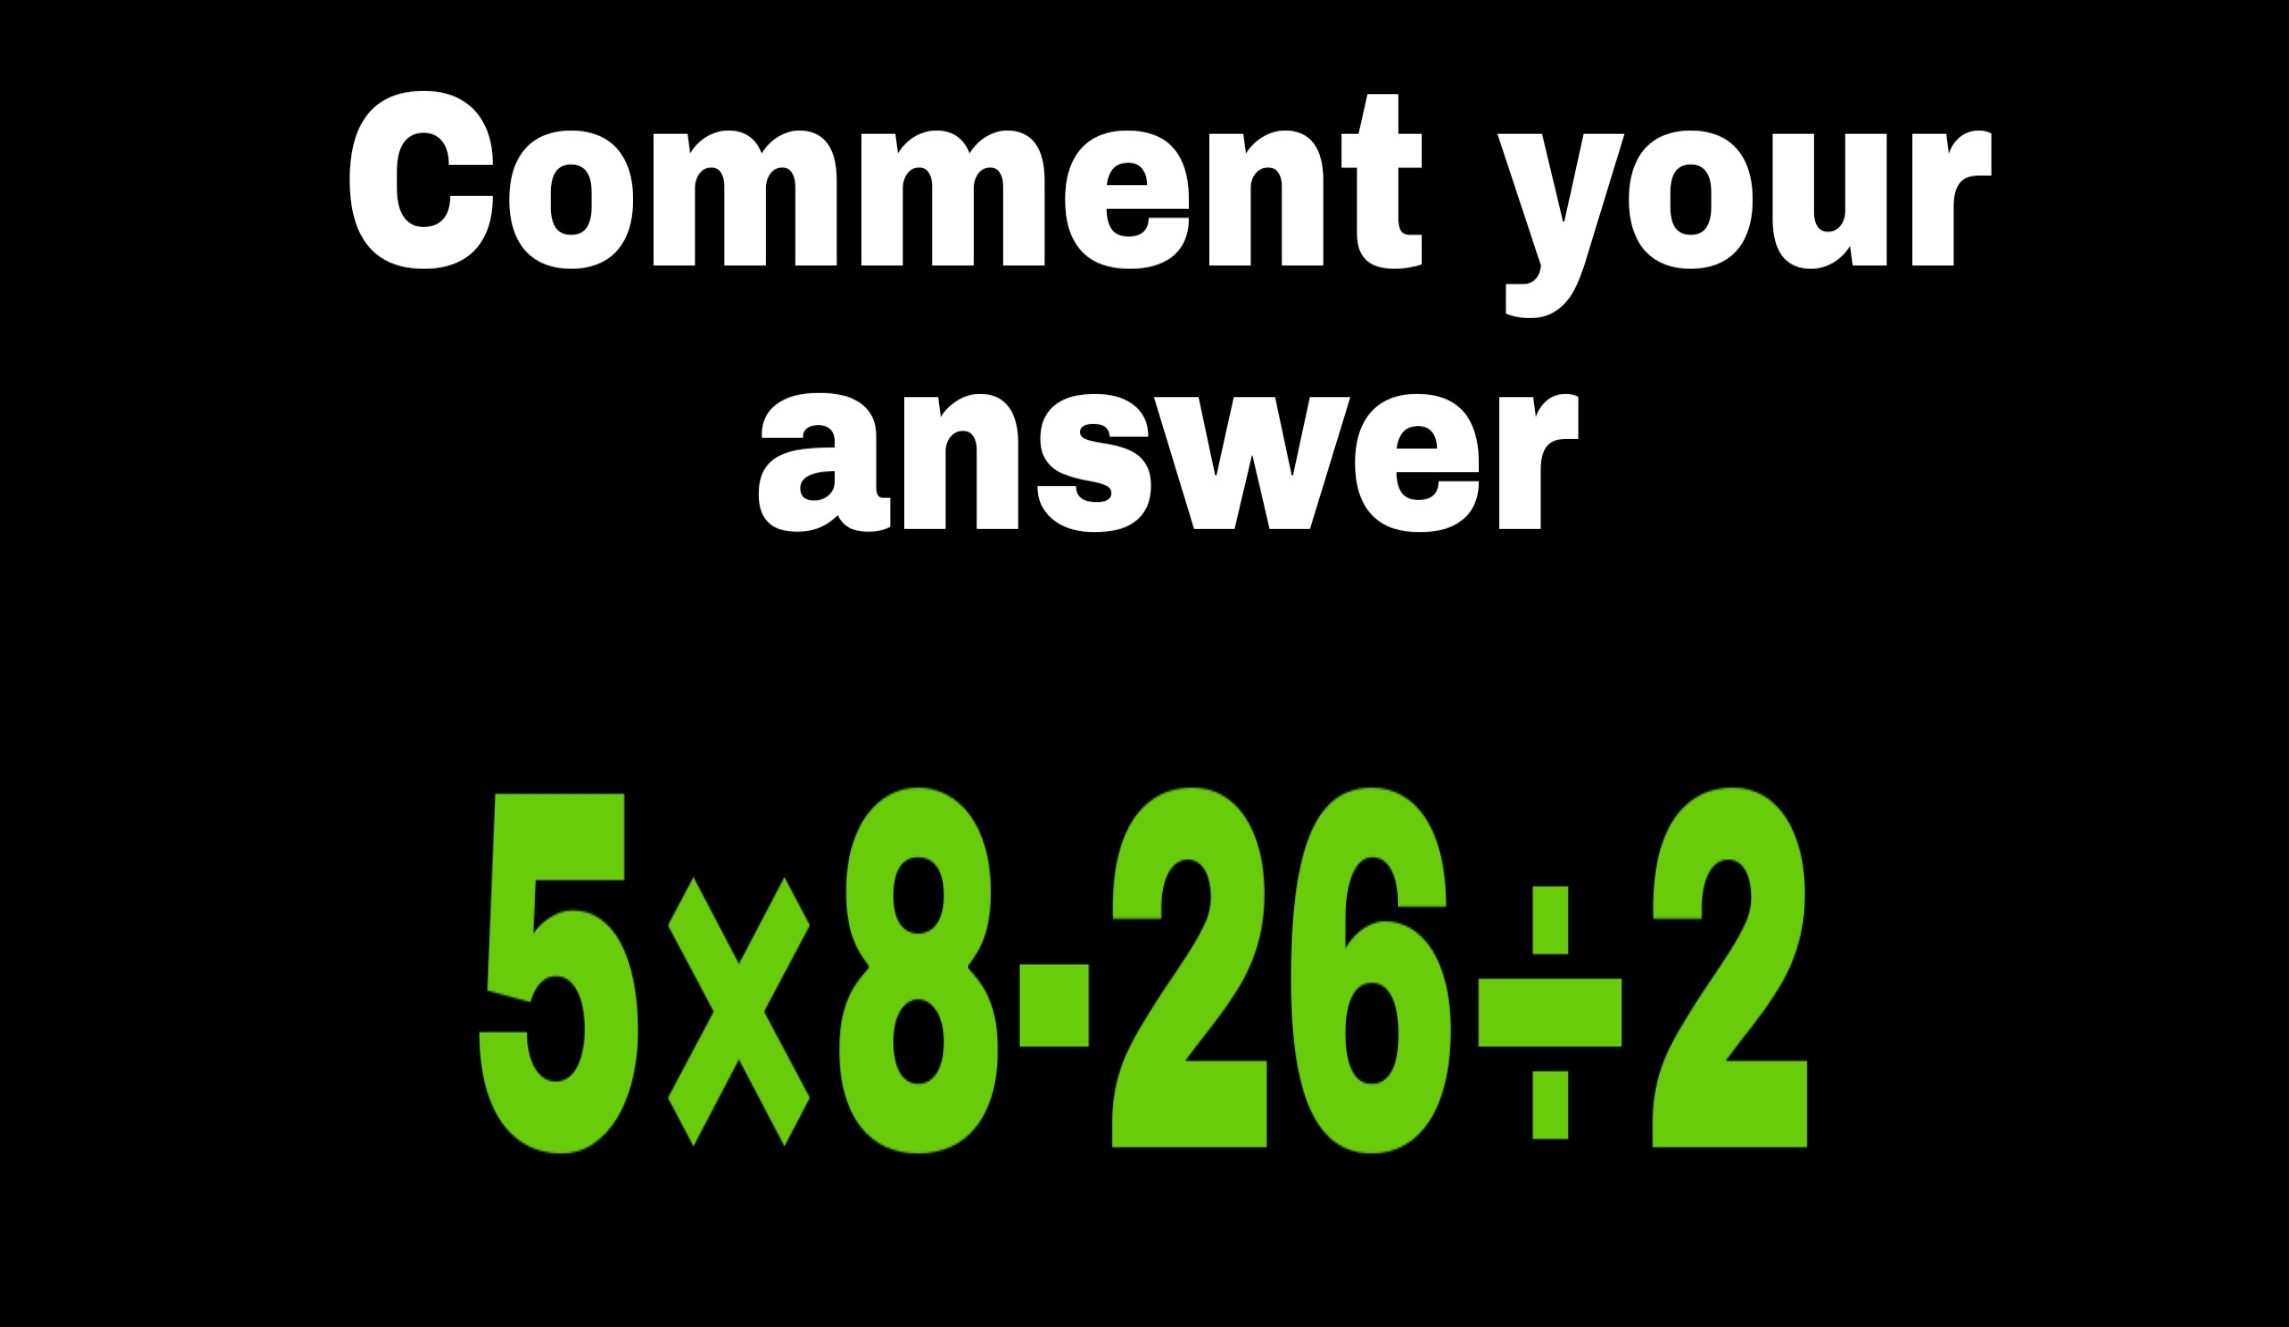 comment your answer 5*8-26/2